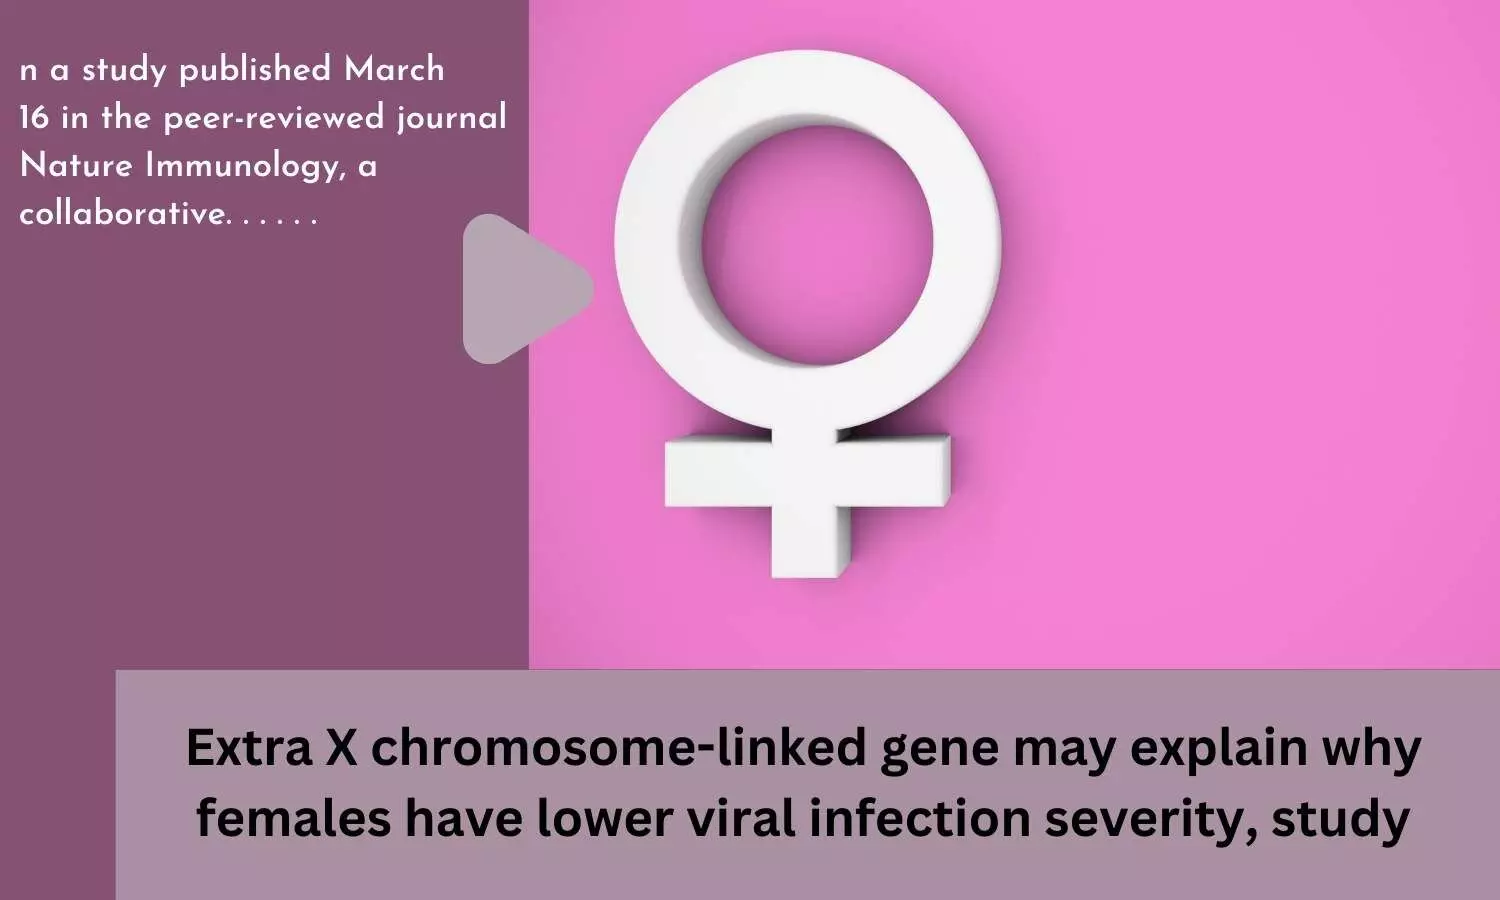 Extra X chromosome-linked gene may explain why females have lower viral infection severity, study